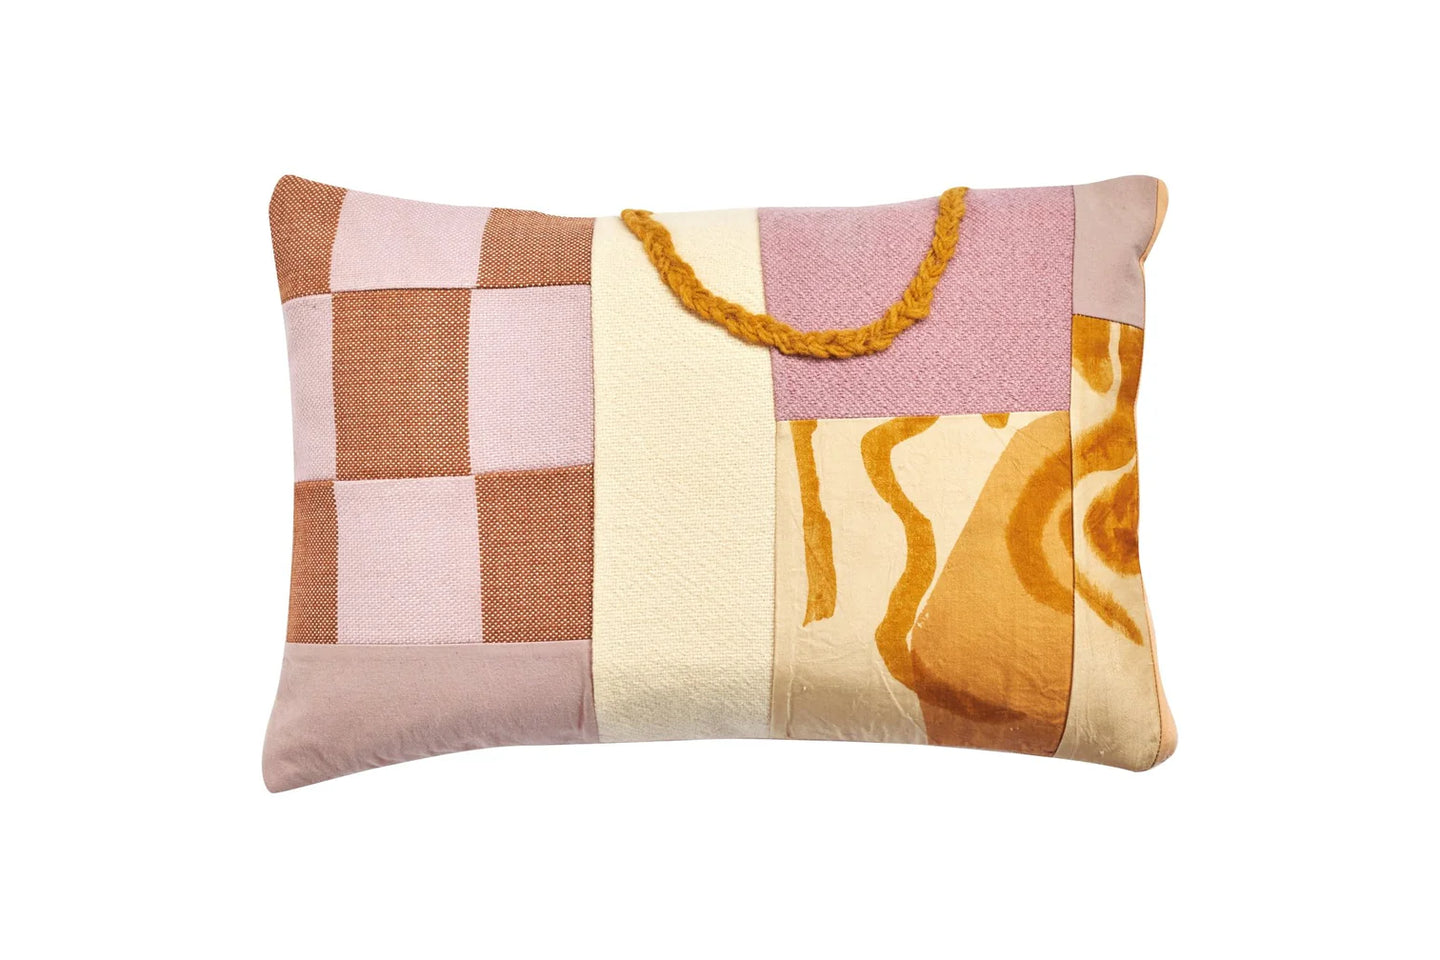 two-sided-cushion-waste-fabrics-screen-printed-silk-cotton-hand-embroidered-patchwork-handwoven-handdyed_painted-wilde-studio-the_home_of_sustainable_things